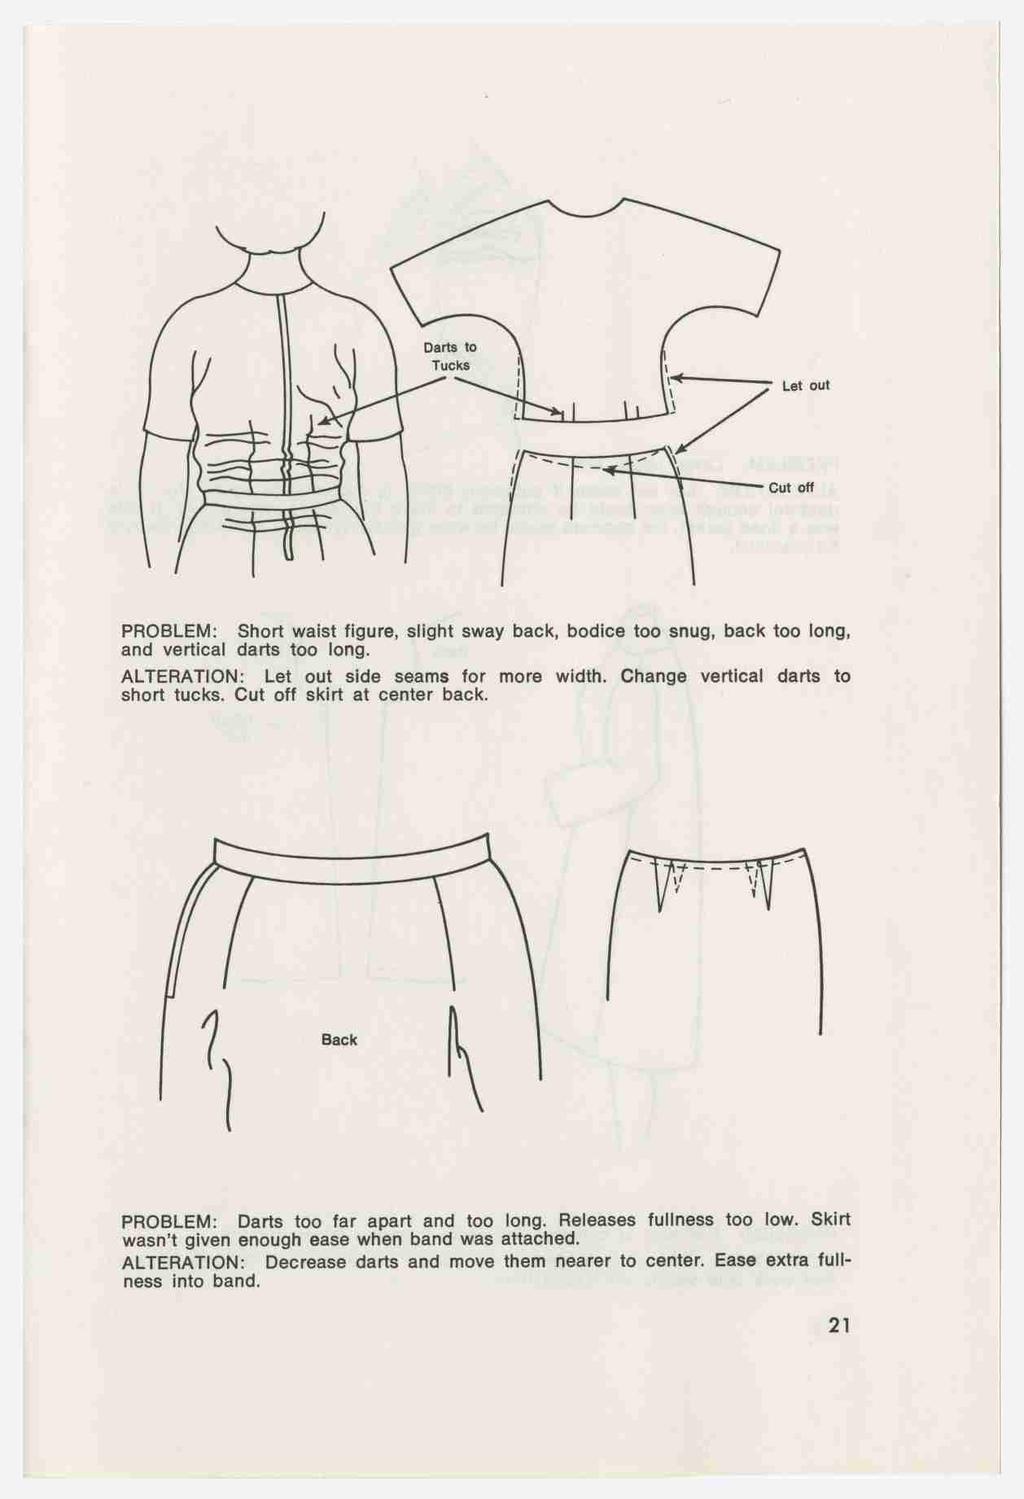 Darts to \ Tucks \ PROBLEM: Short waist figure, slight sway back, bodice too snug, back too long, and vertical darts too long. ALTERATION: Let out side seams for more width.